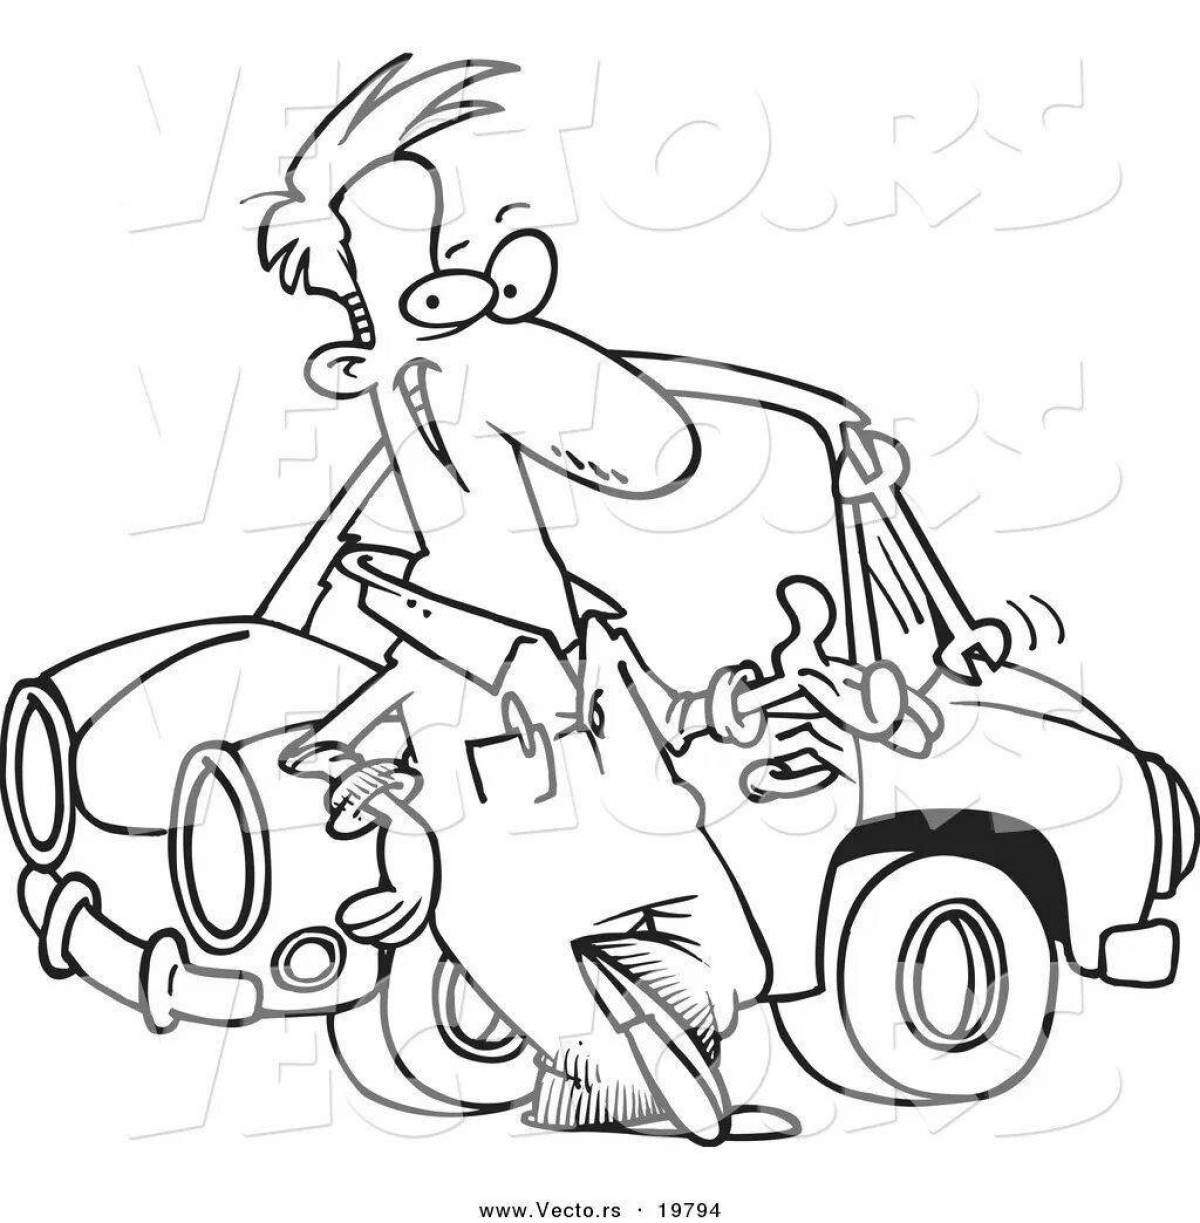 Coloring page charming auto mechanic profession